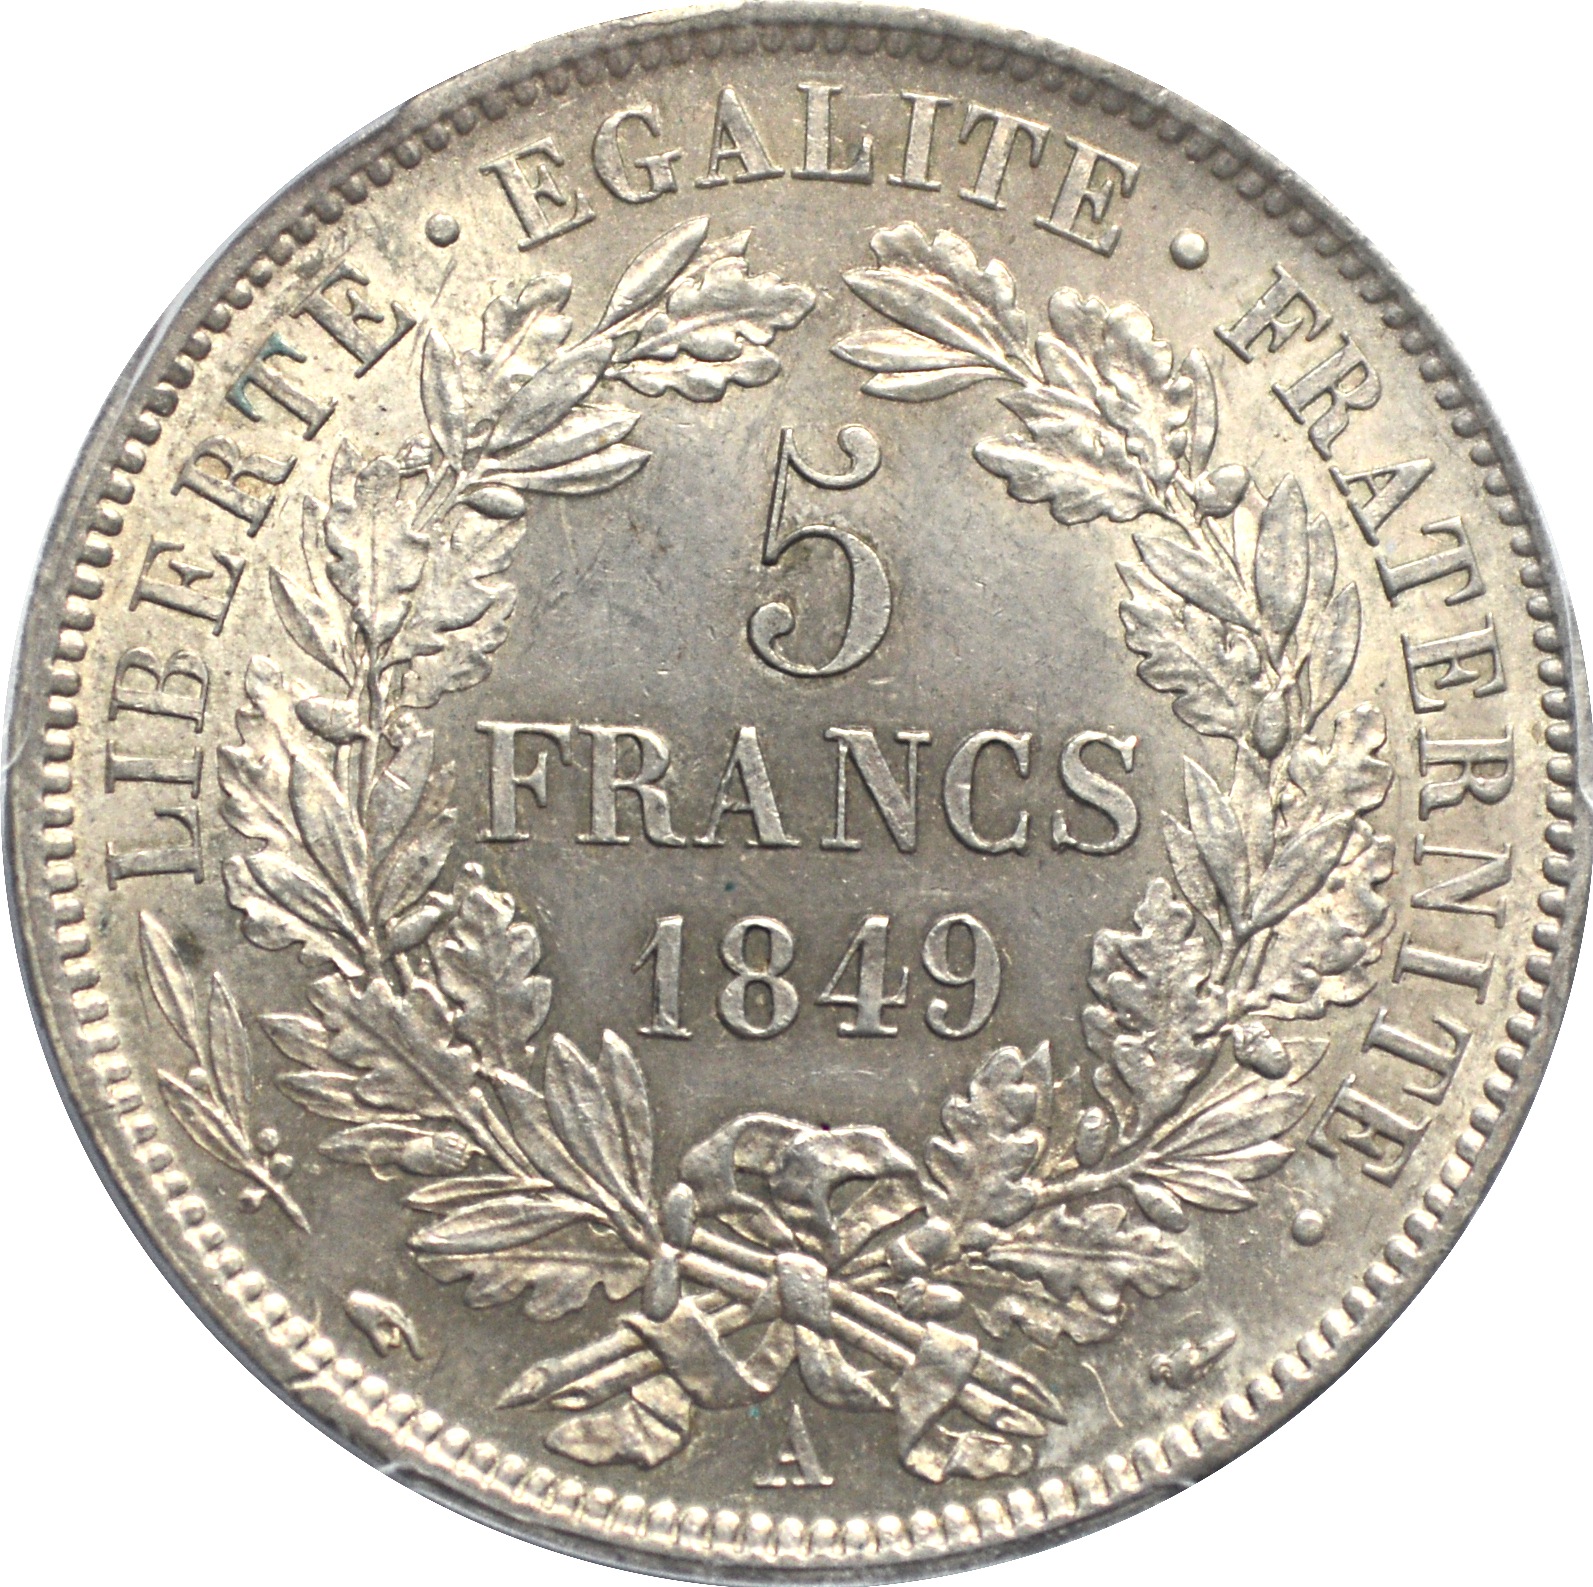 Coins of the Swiss franc - Wikipedia